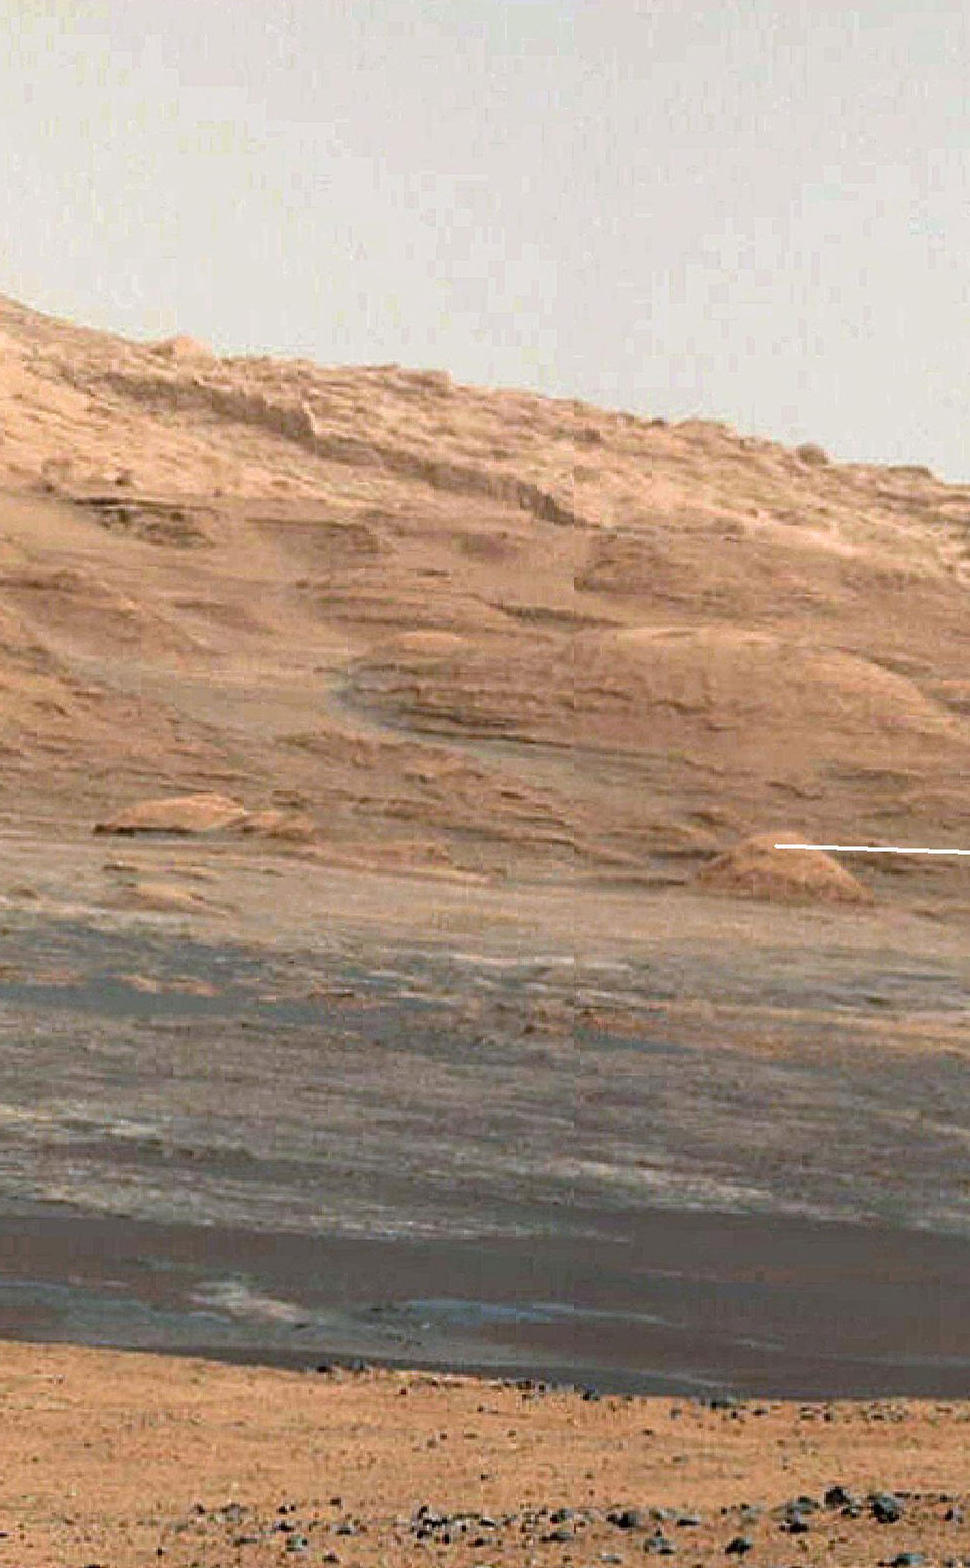 This image (cut out from a mosaic) shows the view from the landing site of NASA's Curiosity rover toward the lower reaches of Mount Sharp, where Curiosity is likely to begin its ascent through hundreds of feet (meters) of layered deposits.